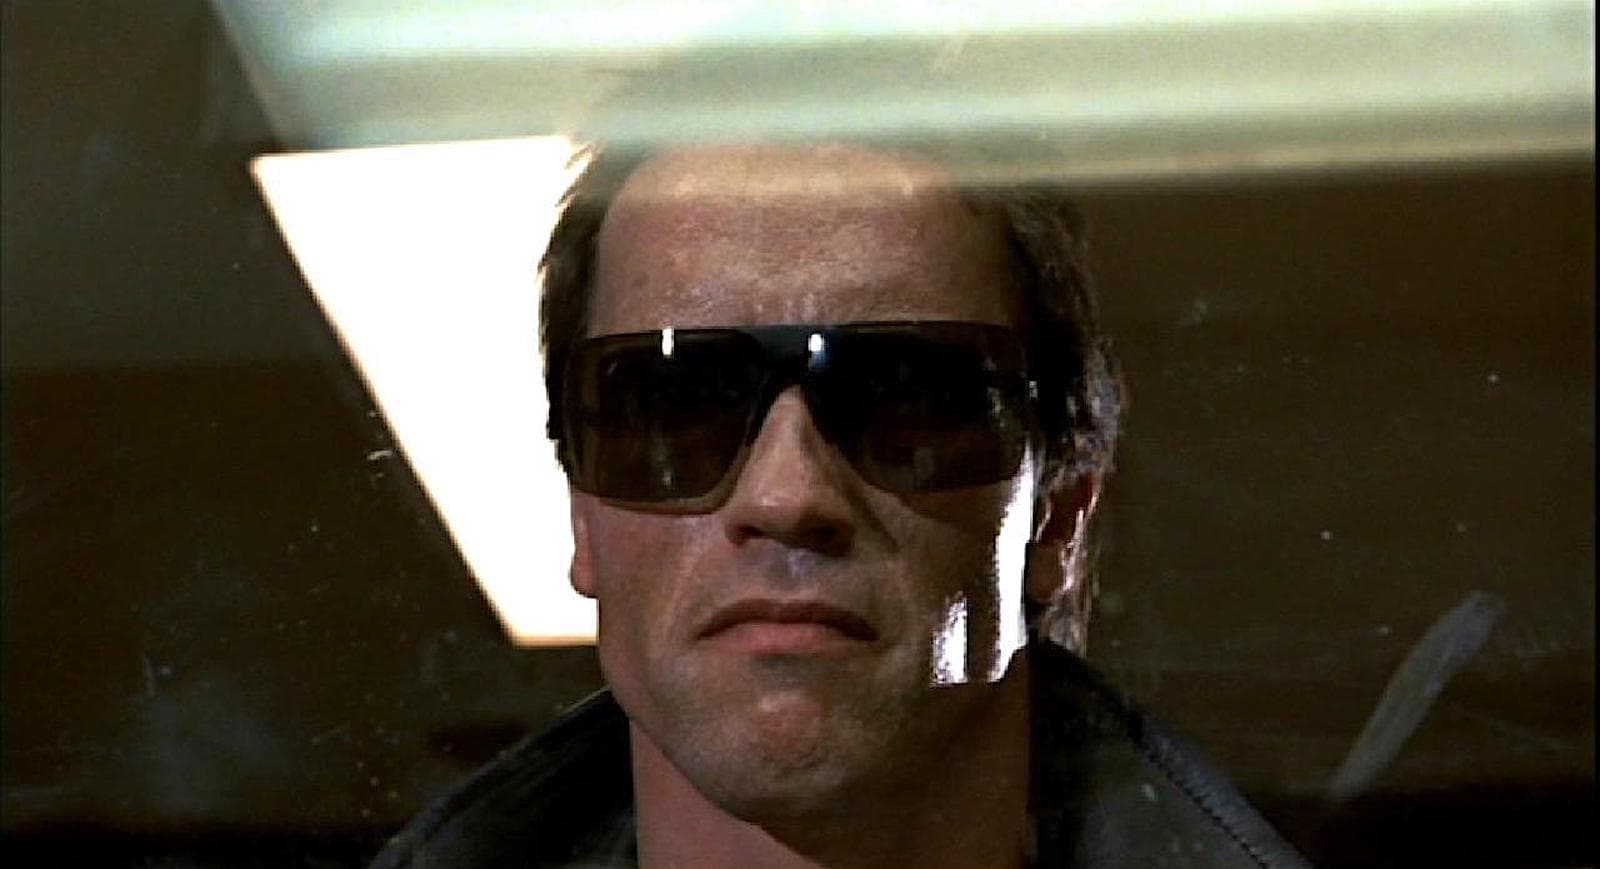 Internal and External Conflict - The Terminator